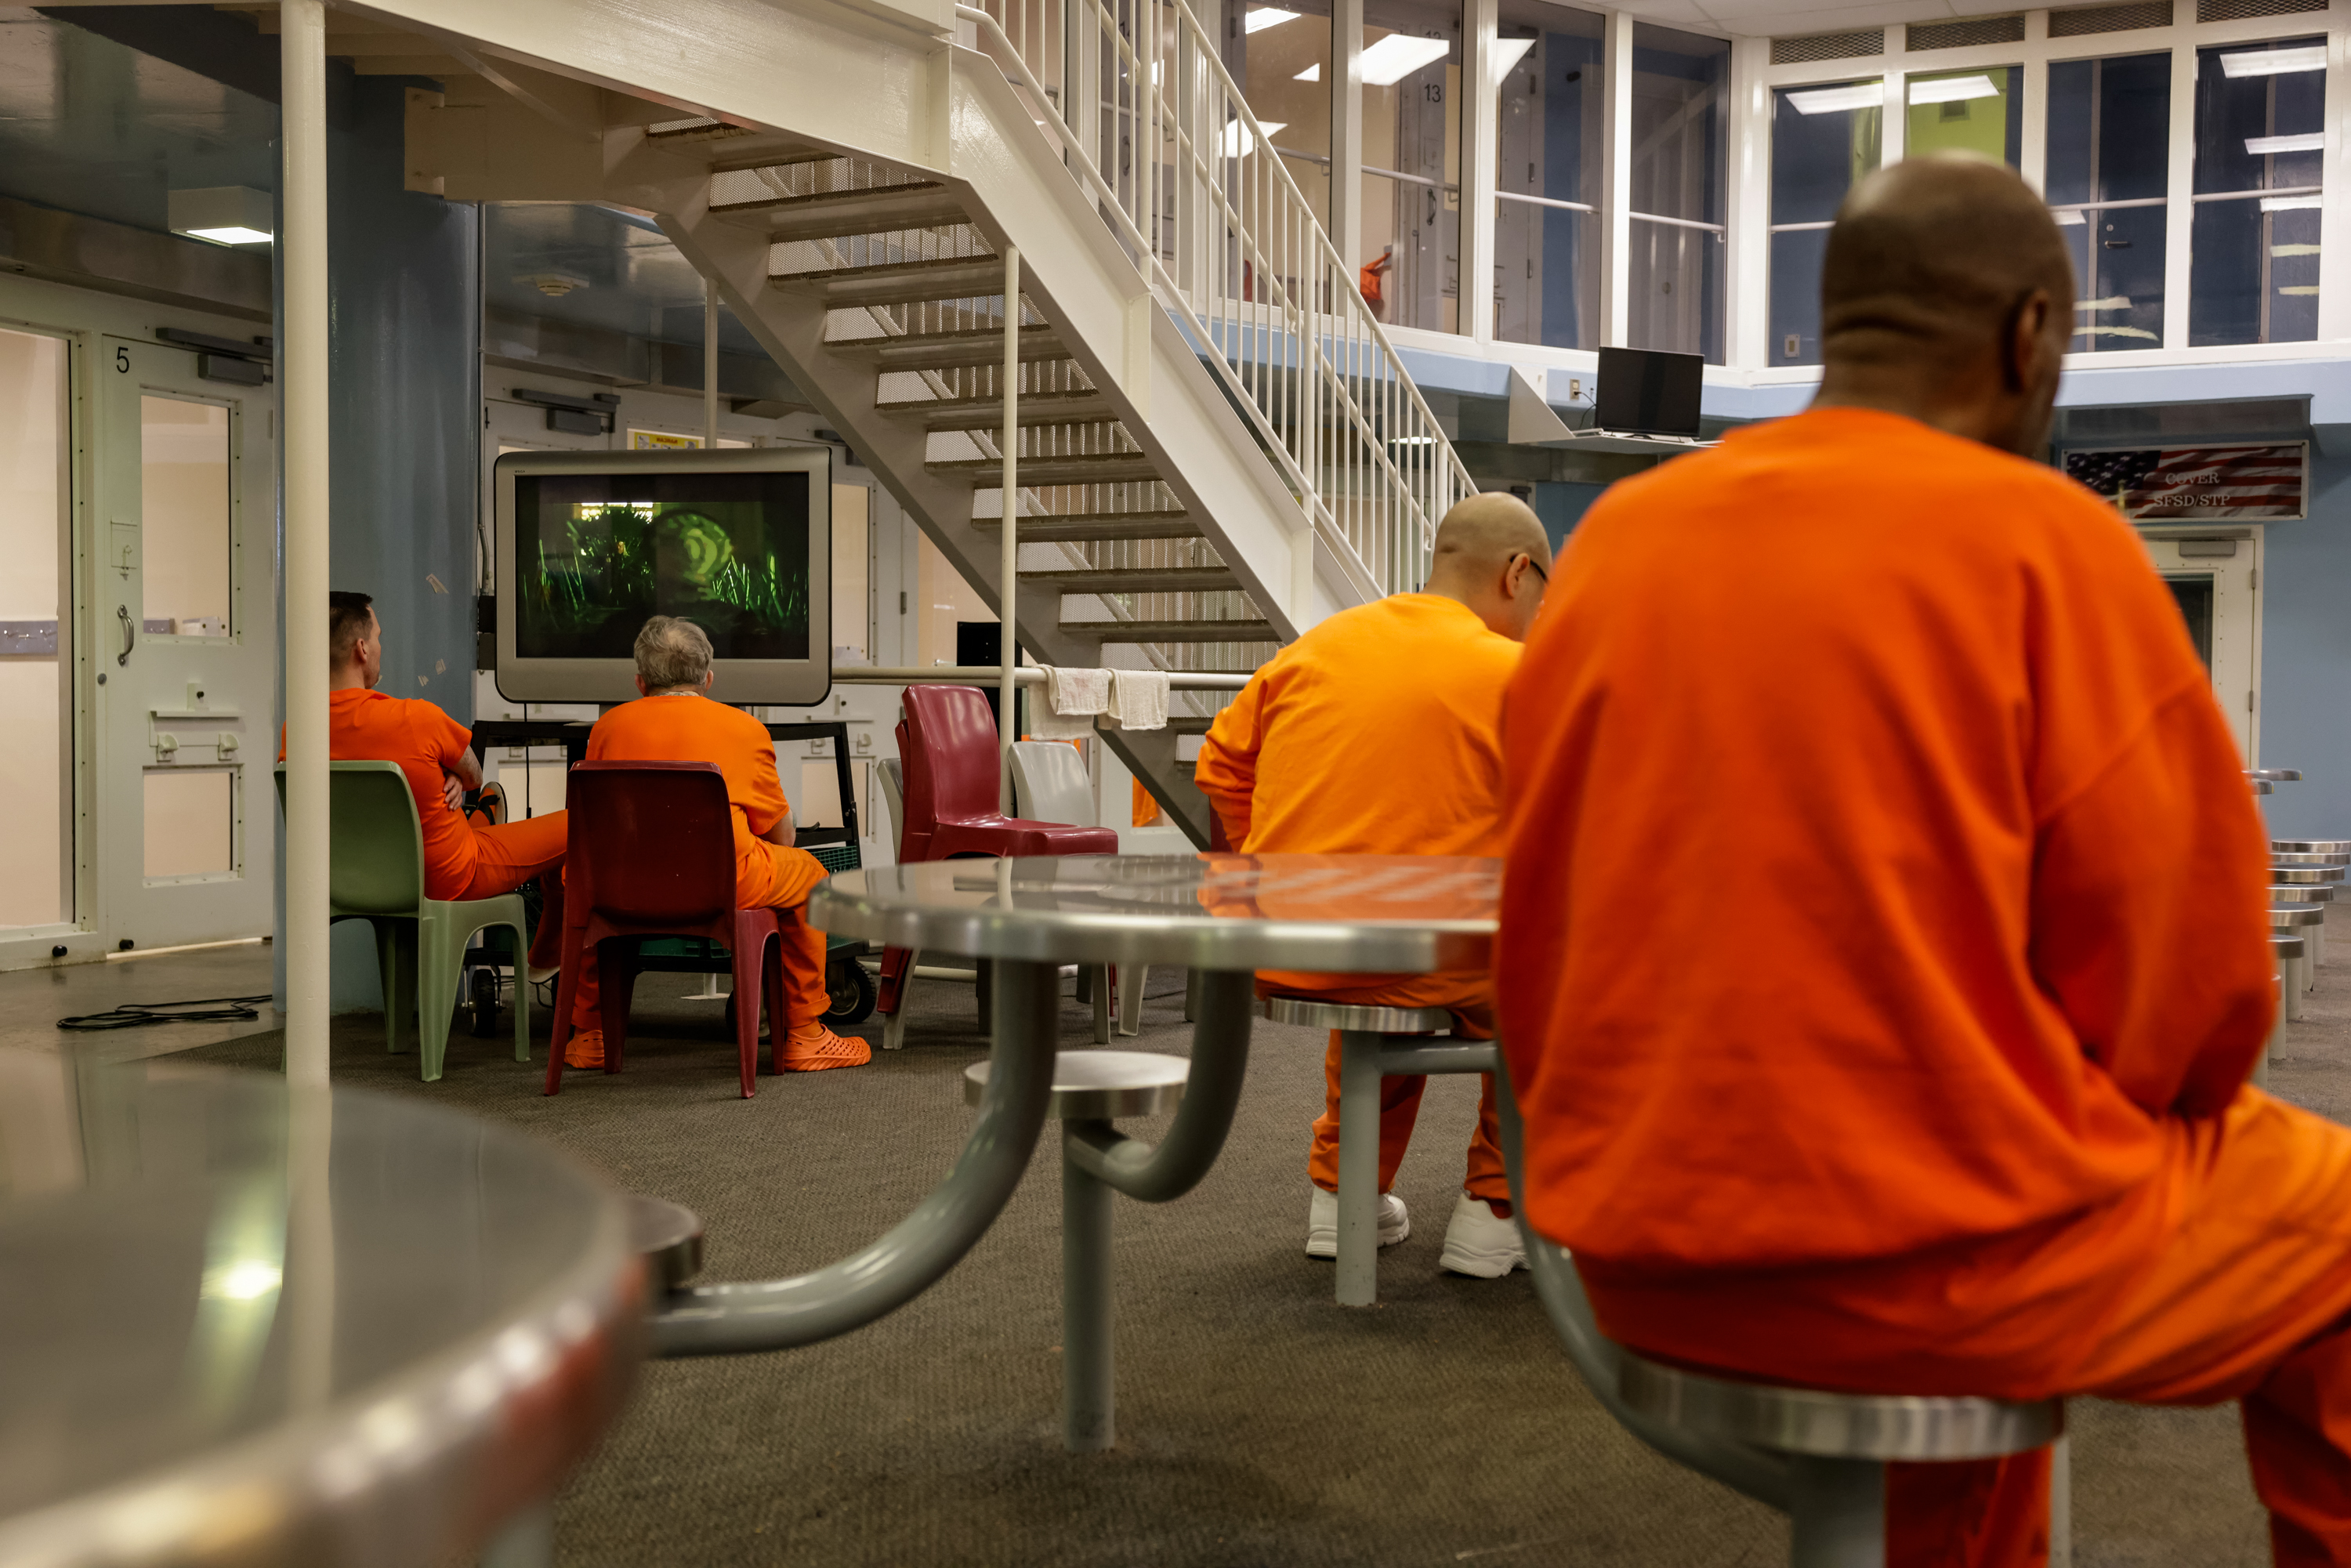 Four inmates dressed in orange scrubs look away from the camera in a communal area in a jail setting.